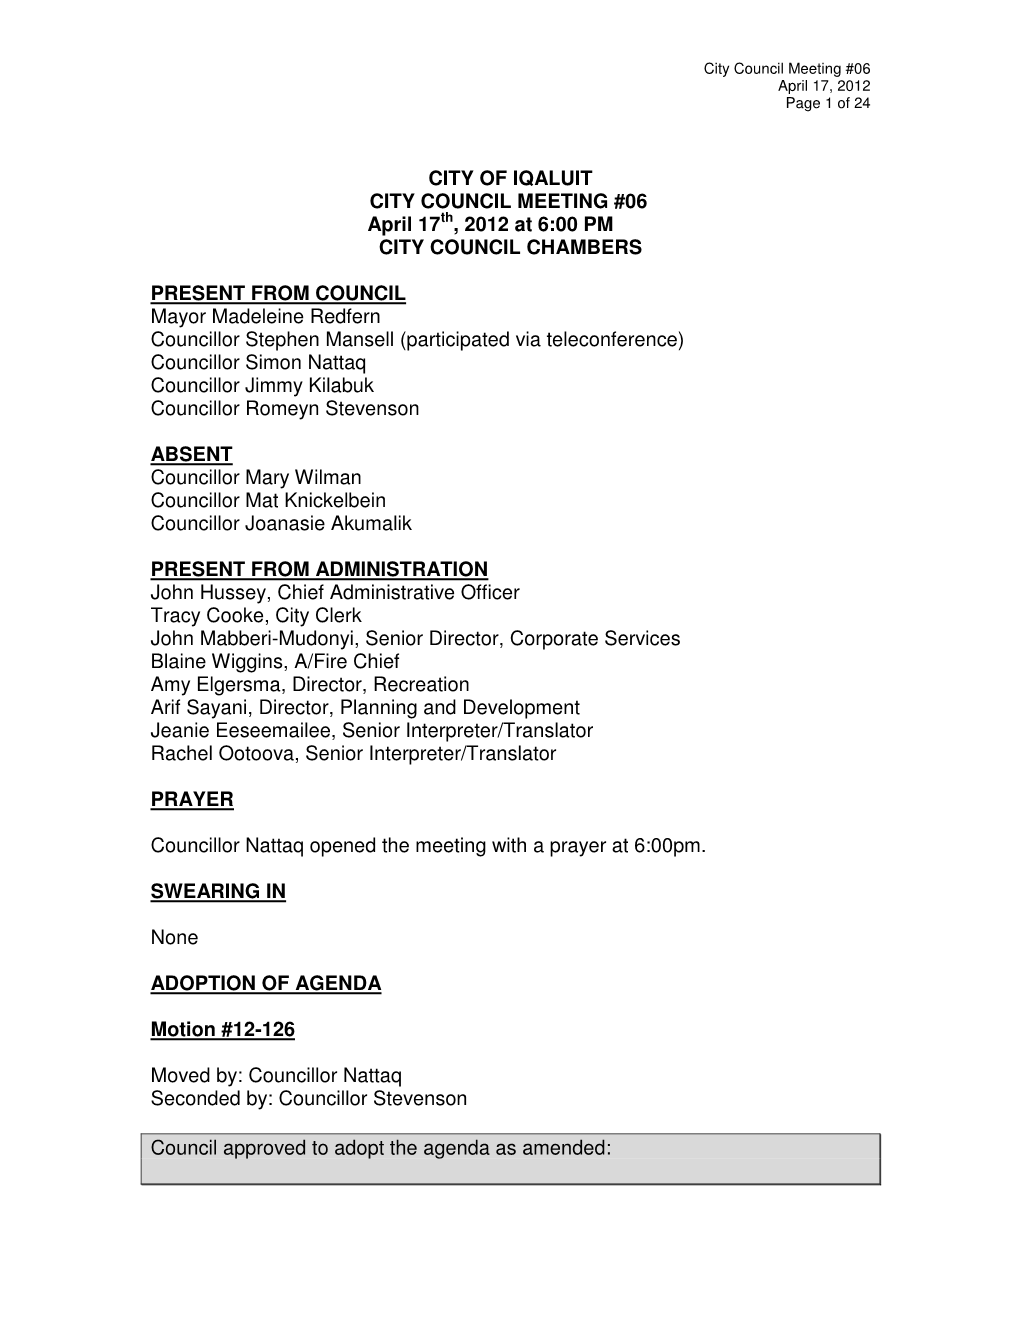 CITY of IQALUIT CITY COUNCIL MEETING #06 April 17Th, 2012 At